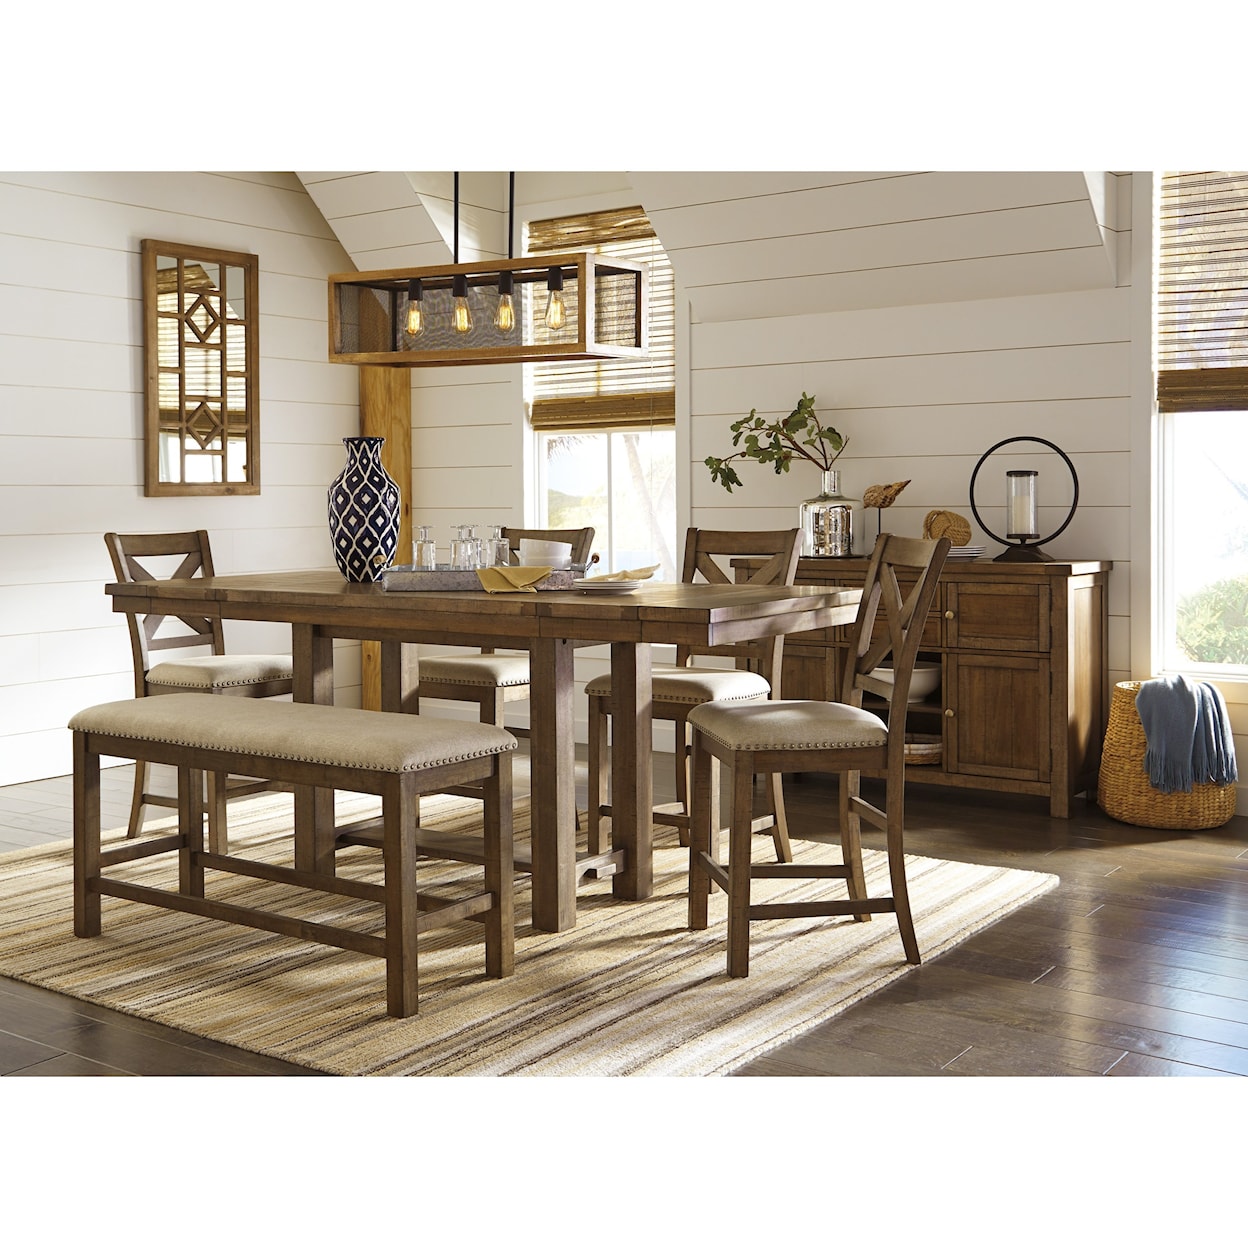 Signature Design by Ashley Furniture Moriville Rect. Dining Room Counter Extension Table